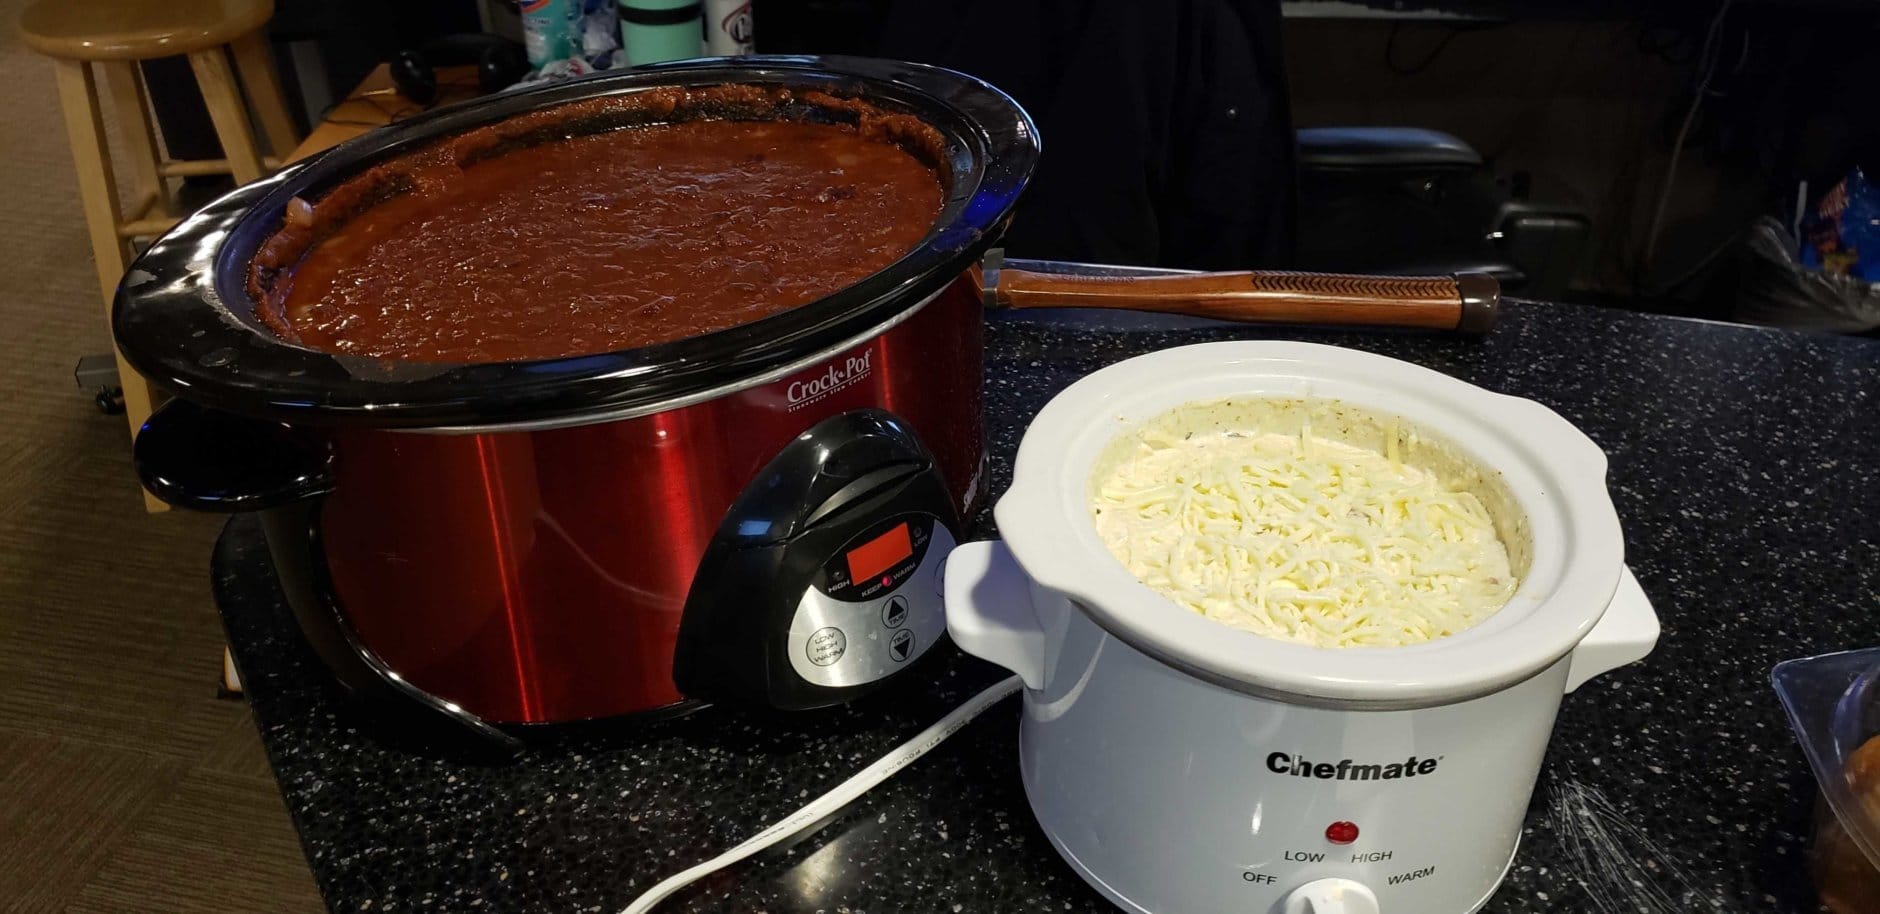 Chili and cheese dip stay warm in the crockpot. (WTOP/Brandon Millman) 